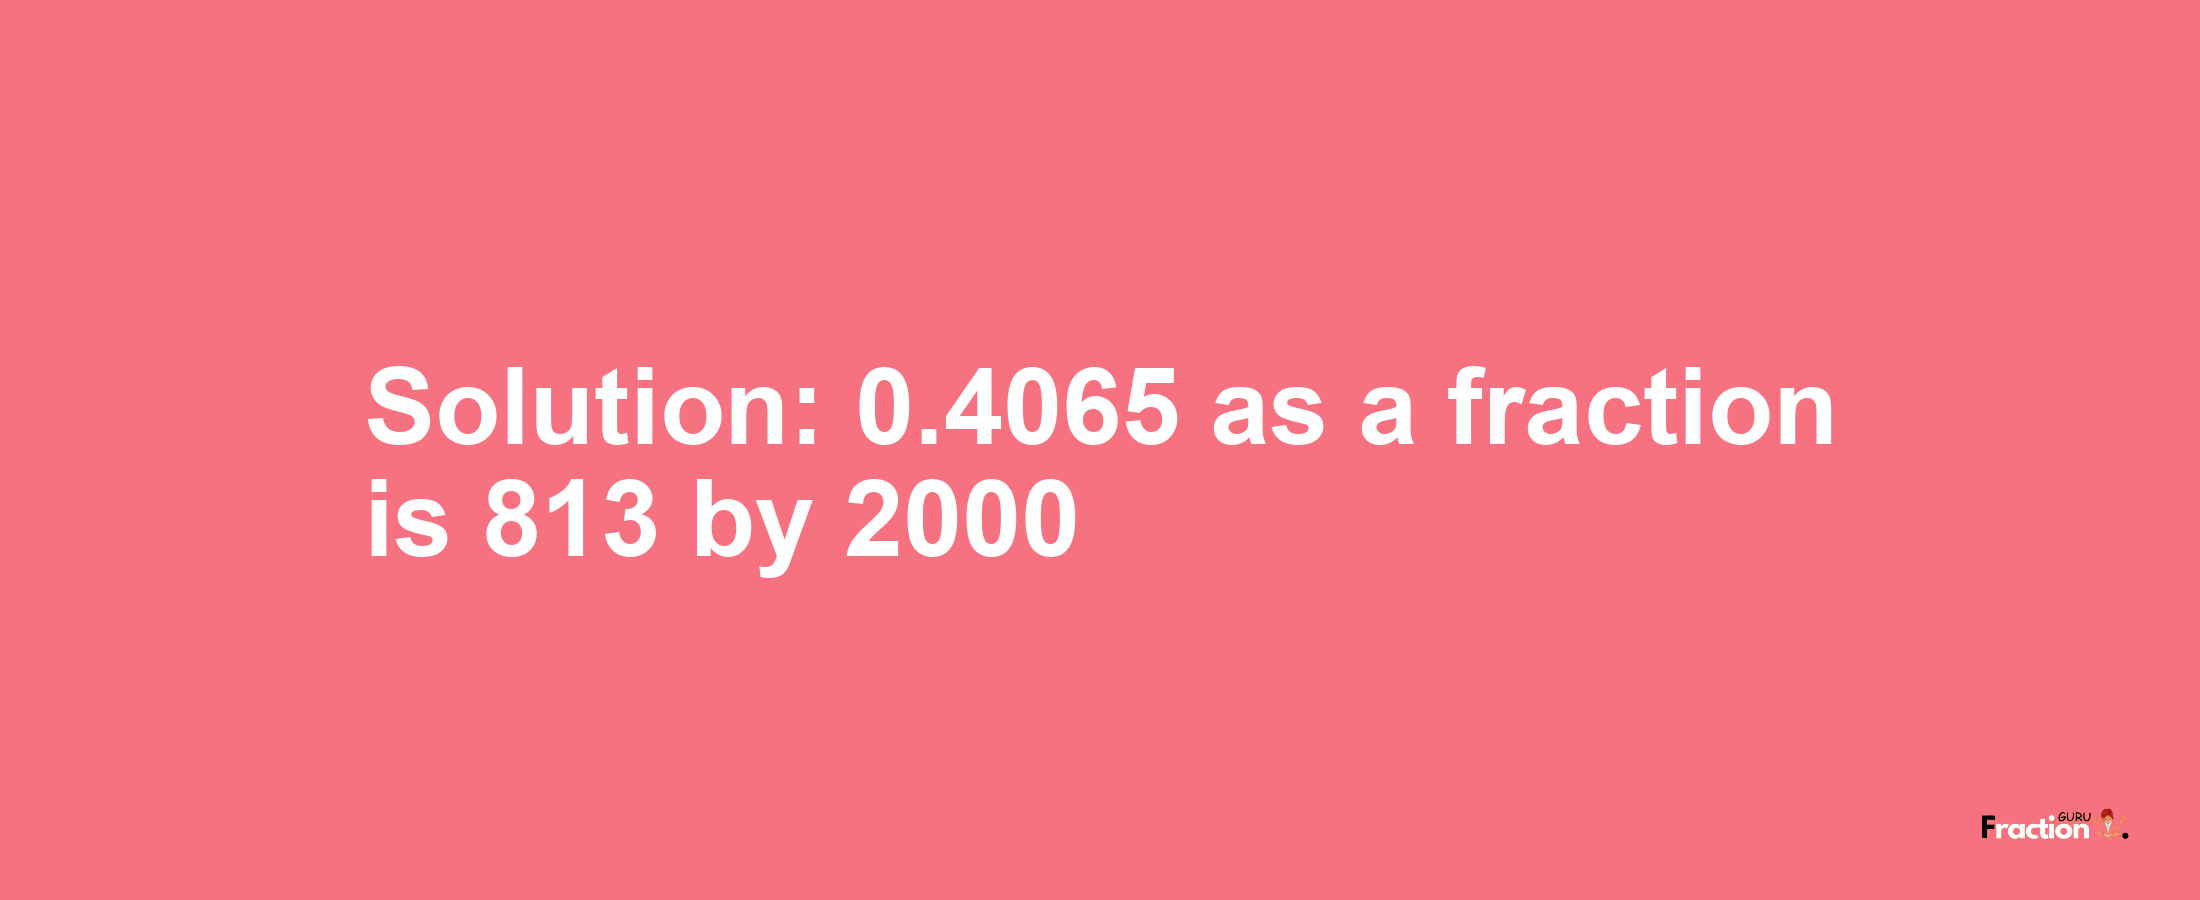 Solution:0.4065 as a fraction is 813/2000